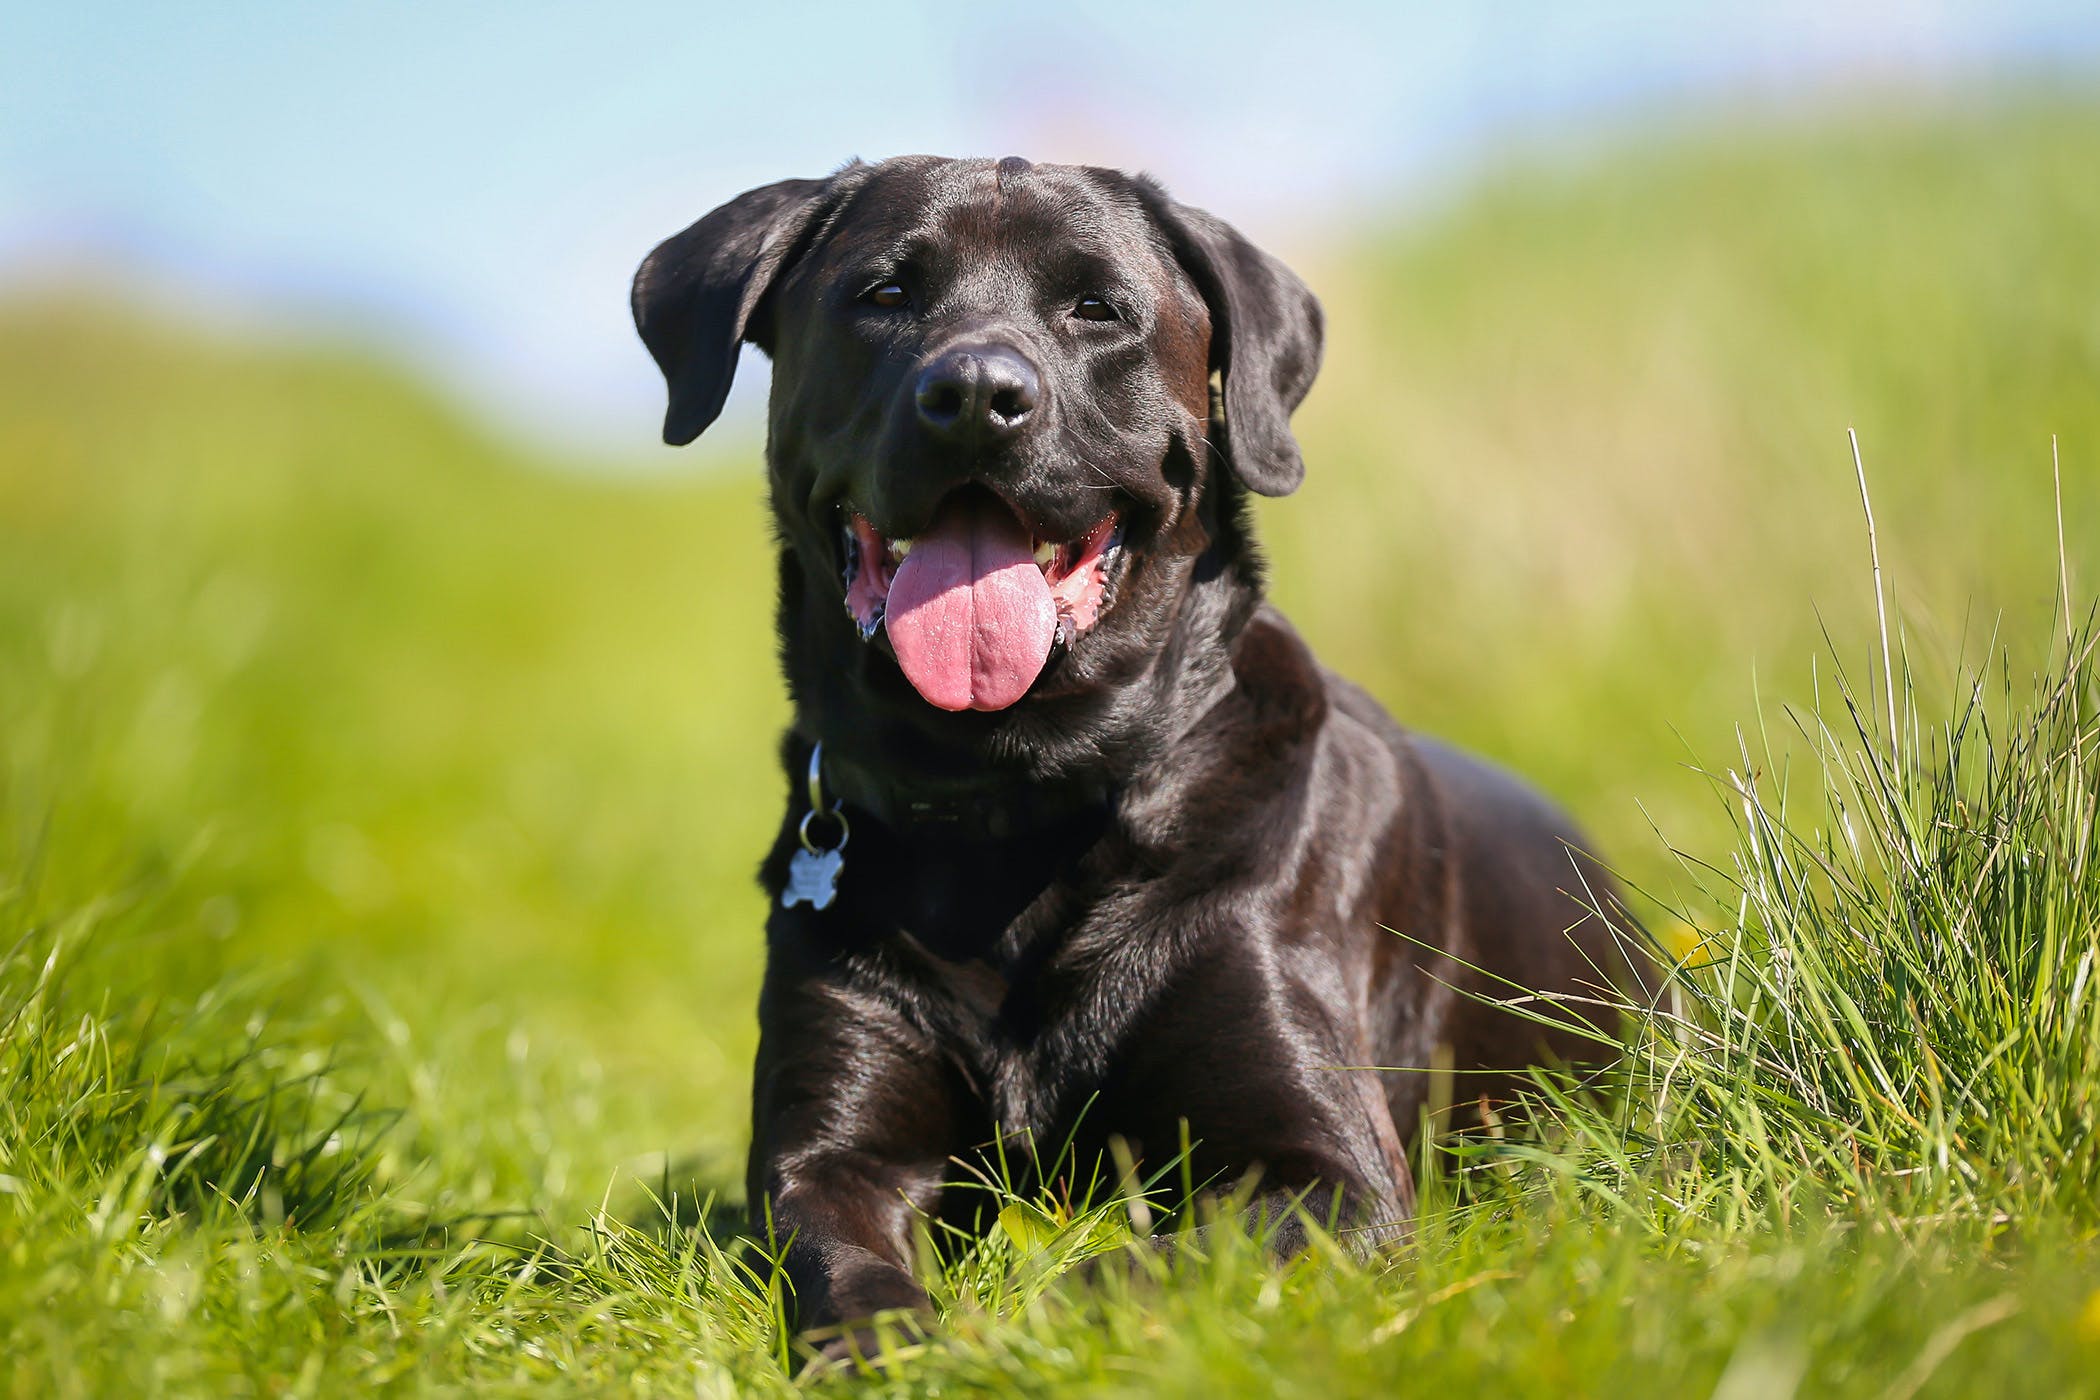 Is ascites in dogs an emergency?